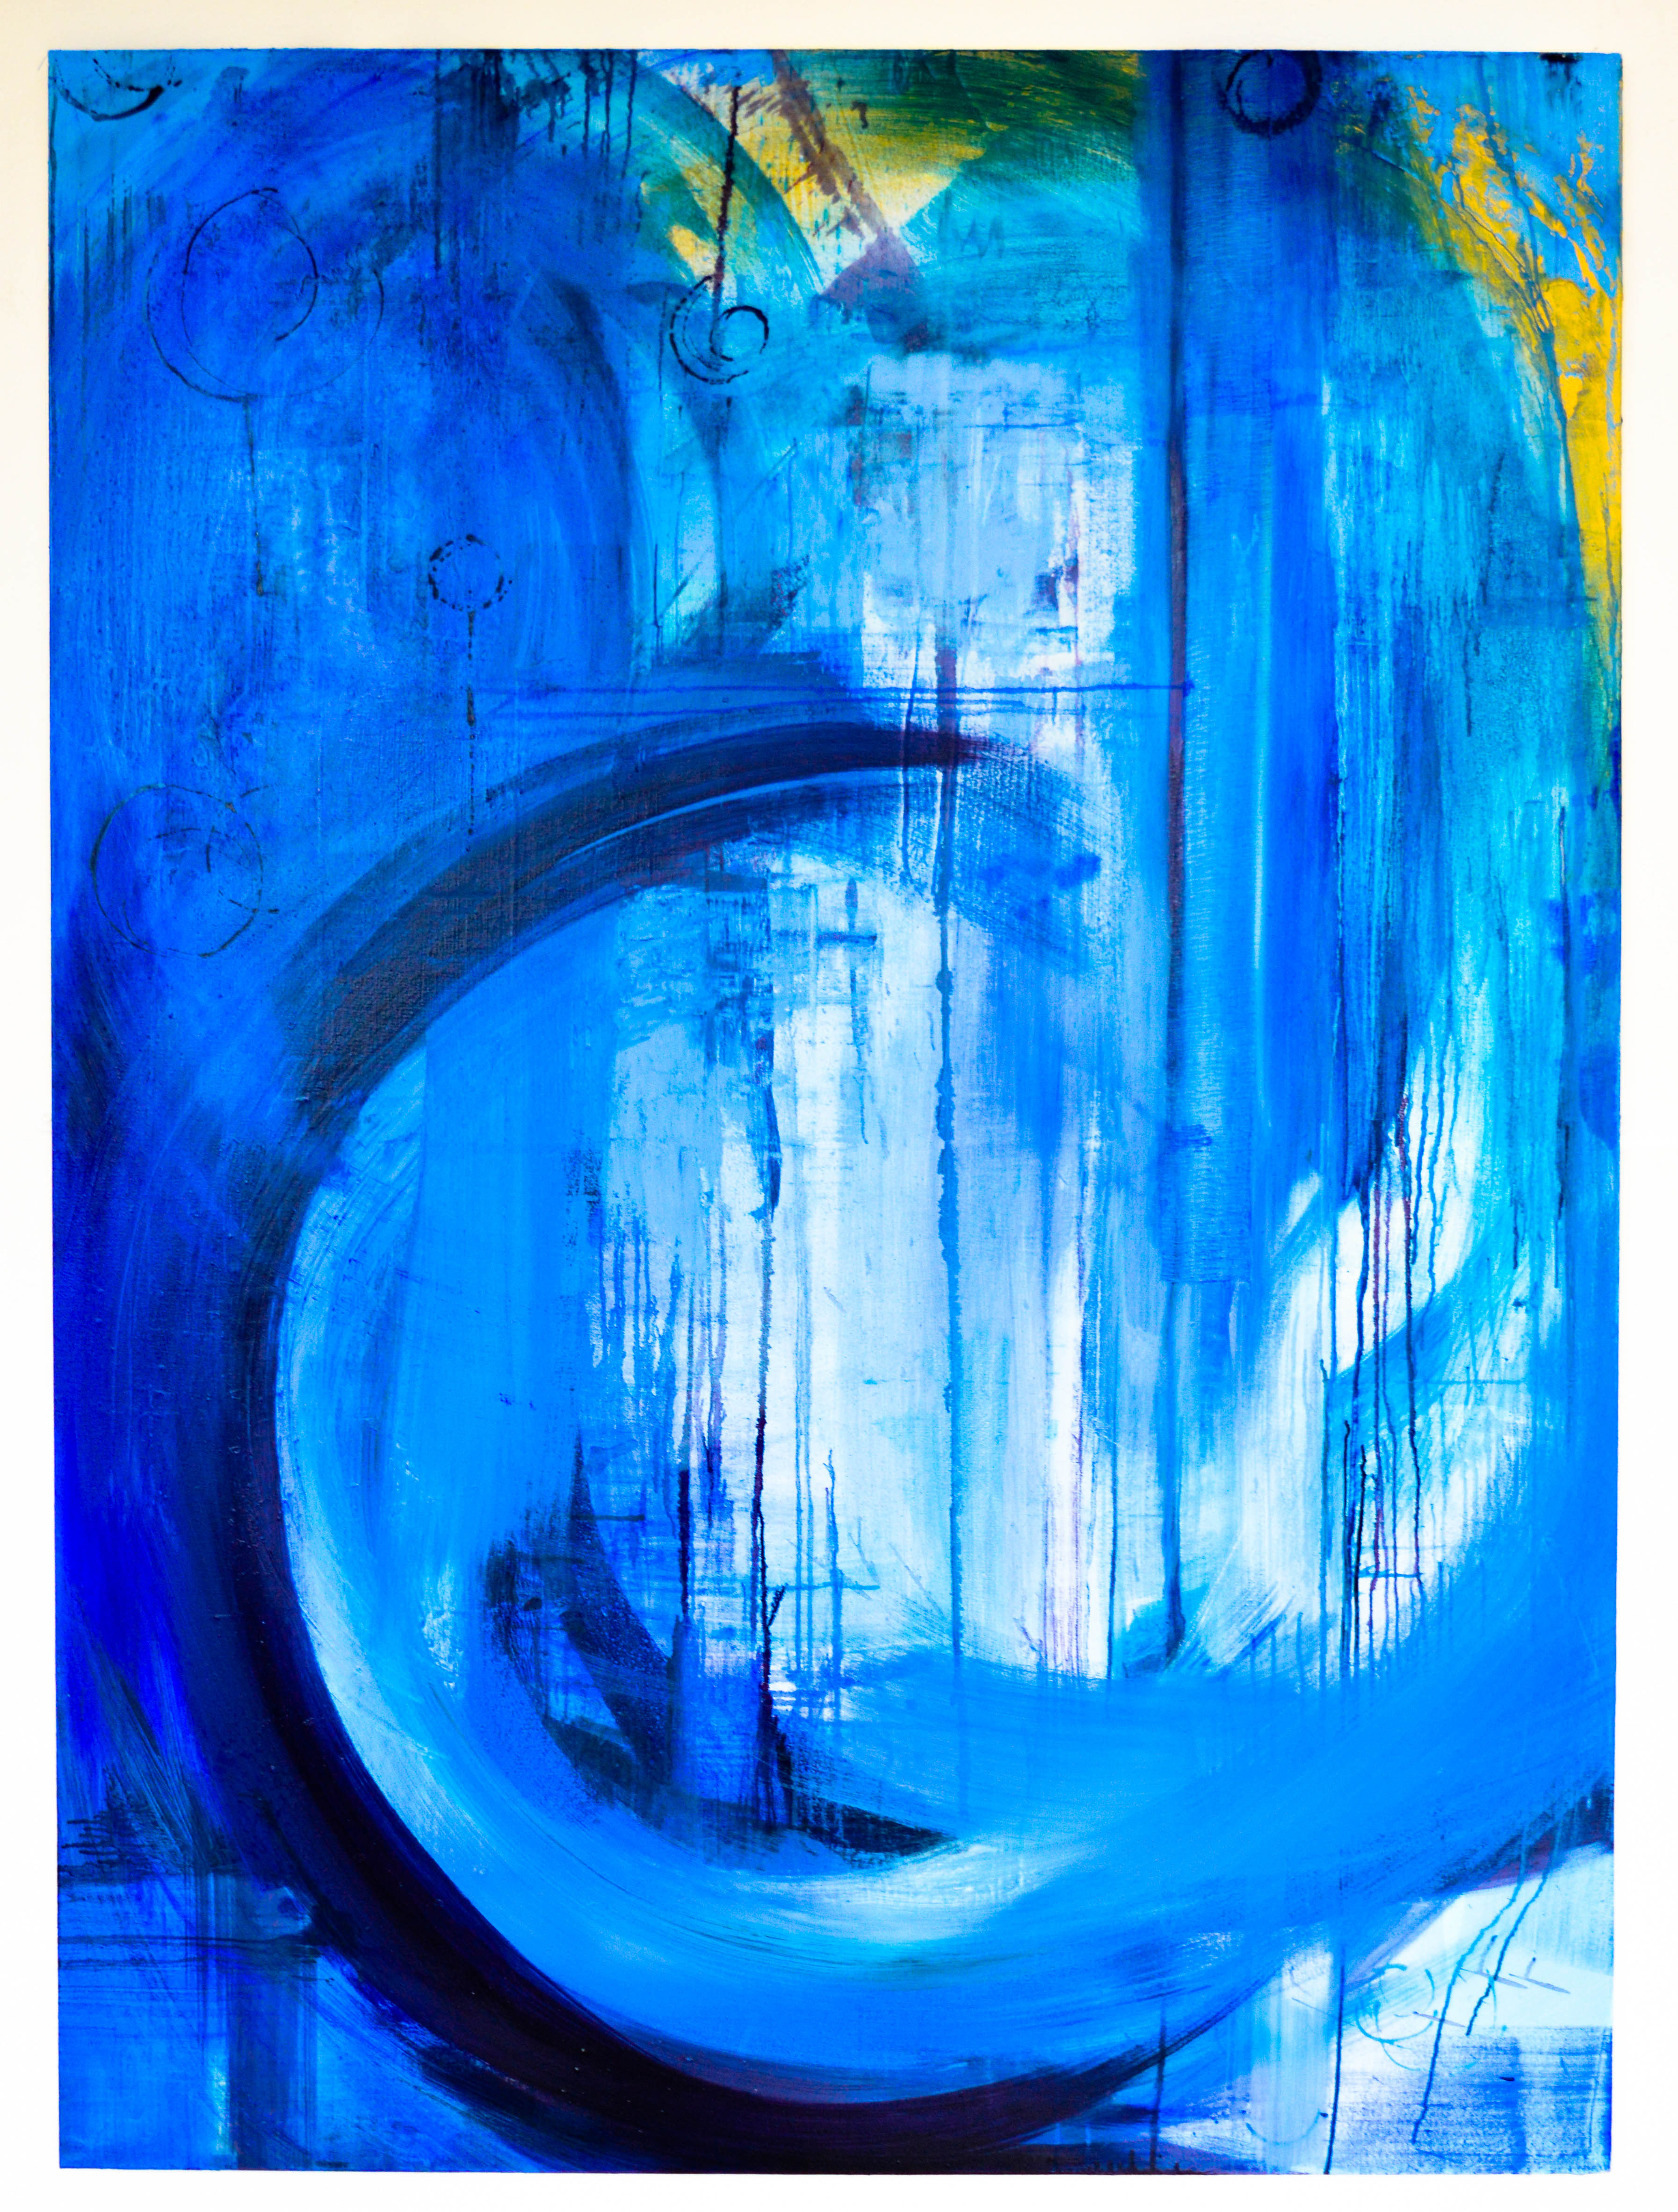 Blue Series 2.1. Oil on canvas. 182.9x134.5cm. For Sale.